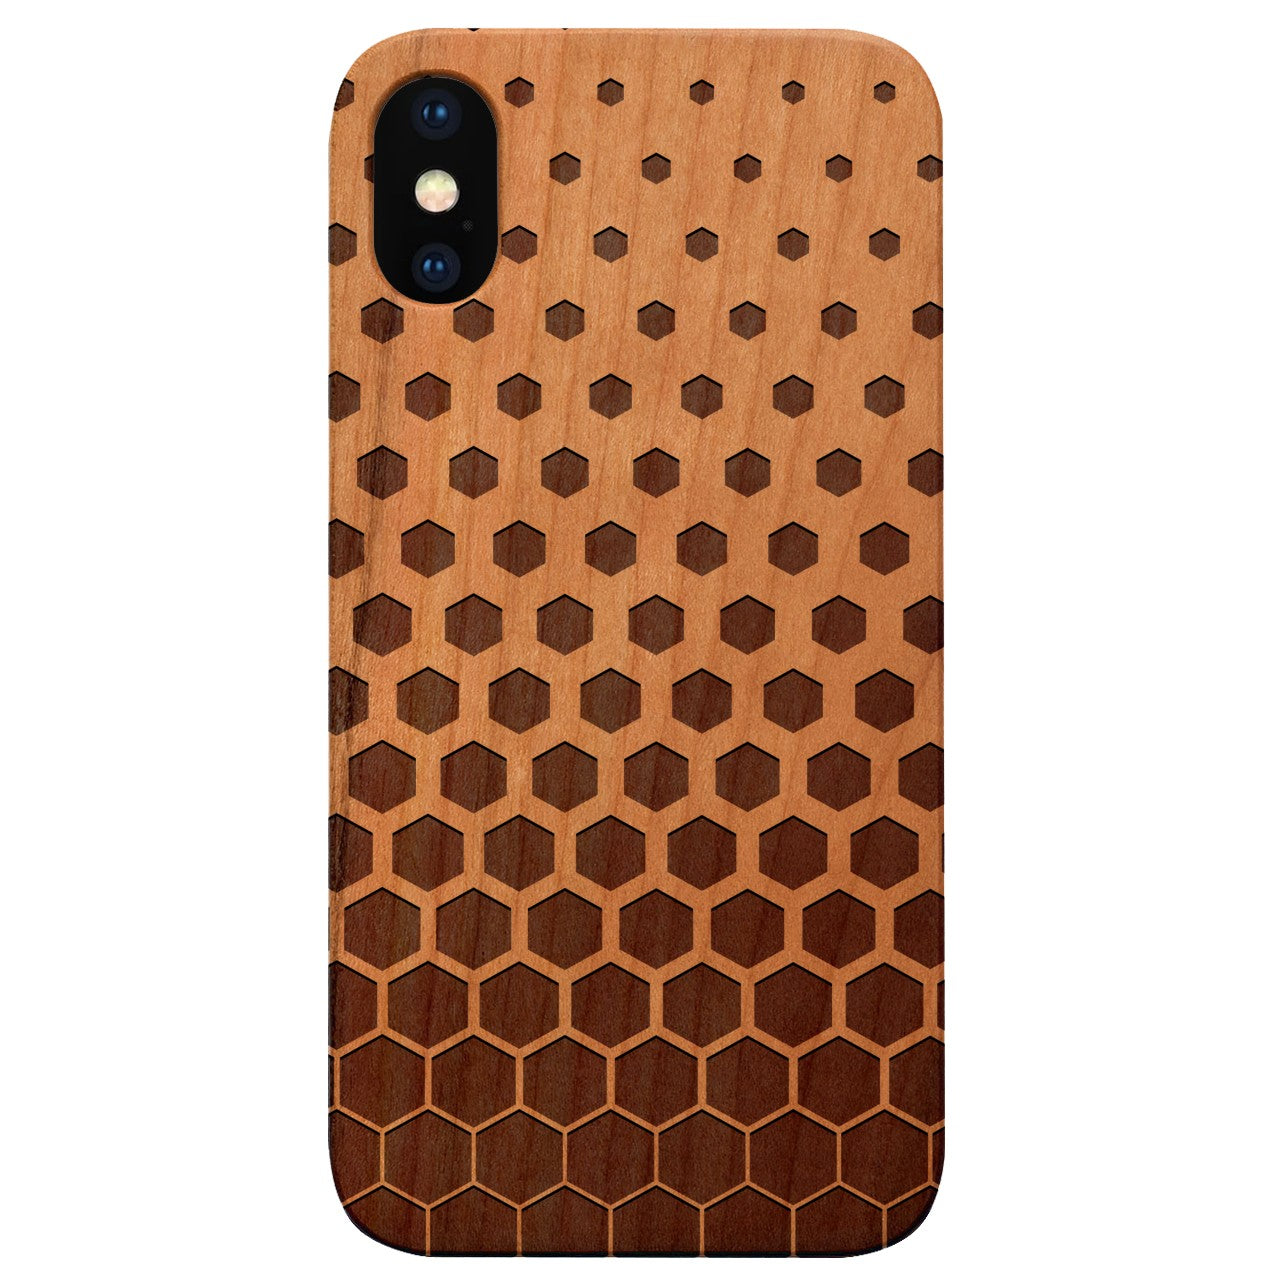  Hexagon Pattern 1 - Engraved - Wooden Phone Case - IPhone 13 Models